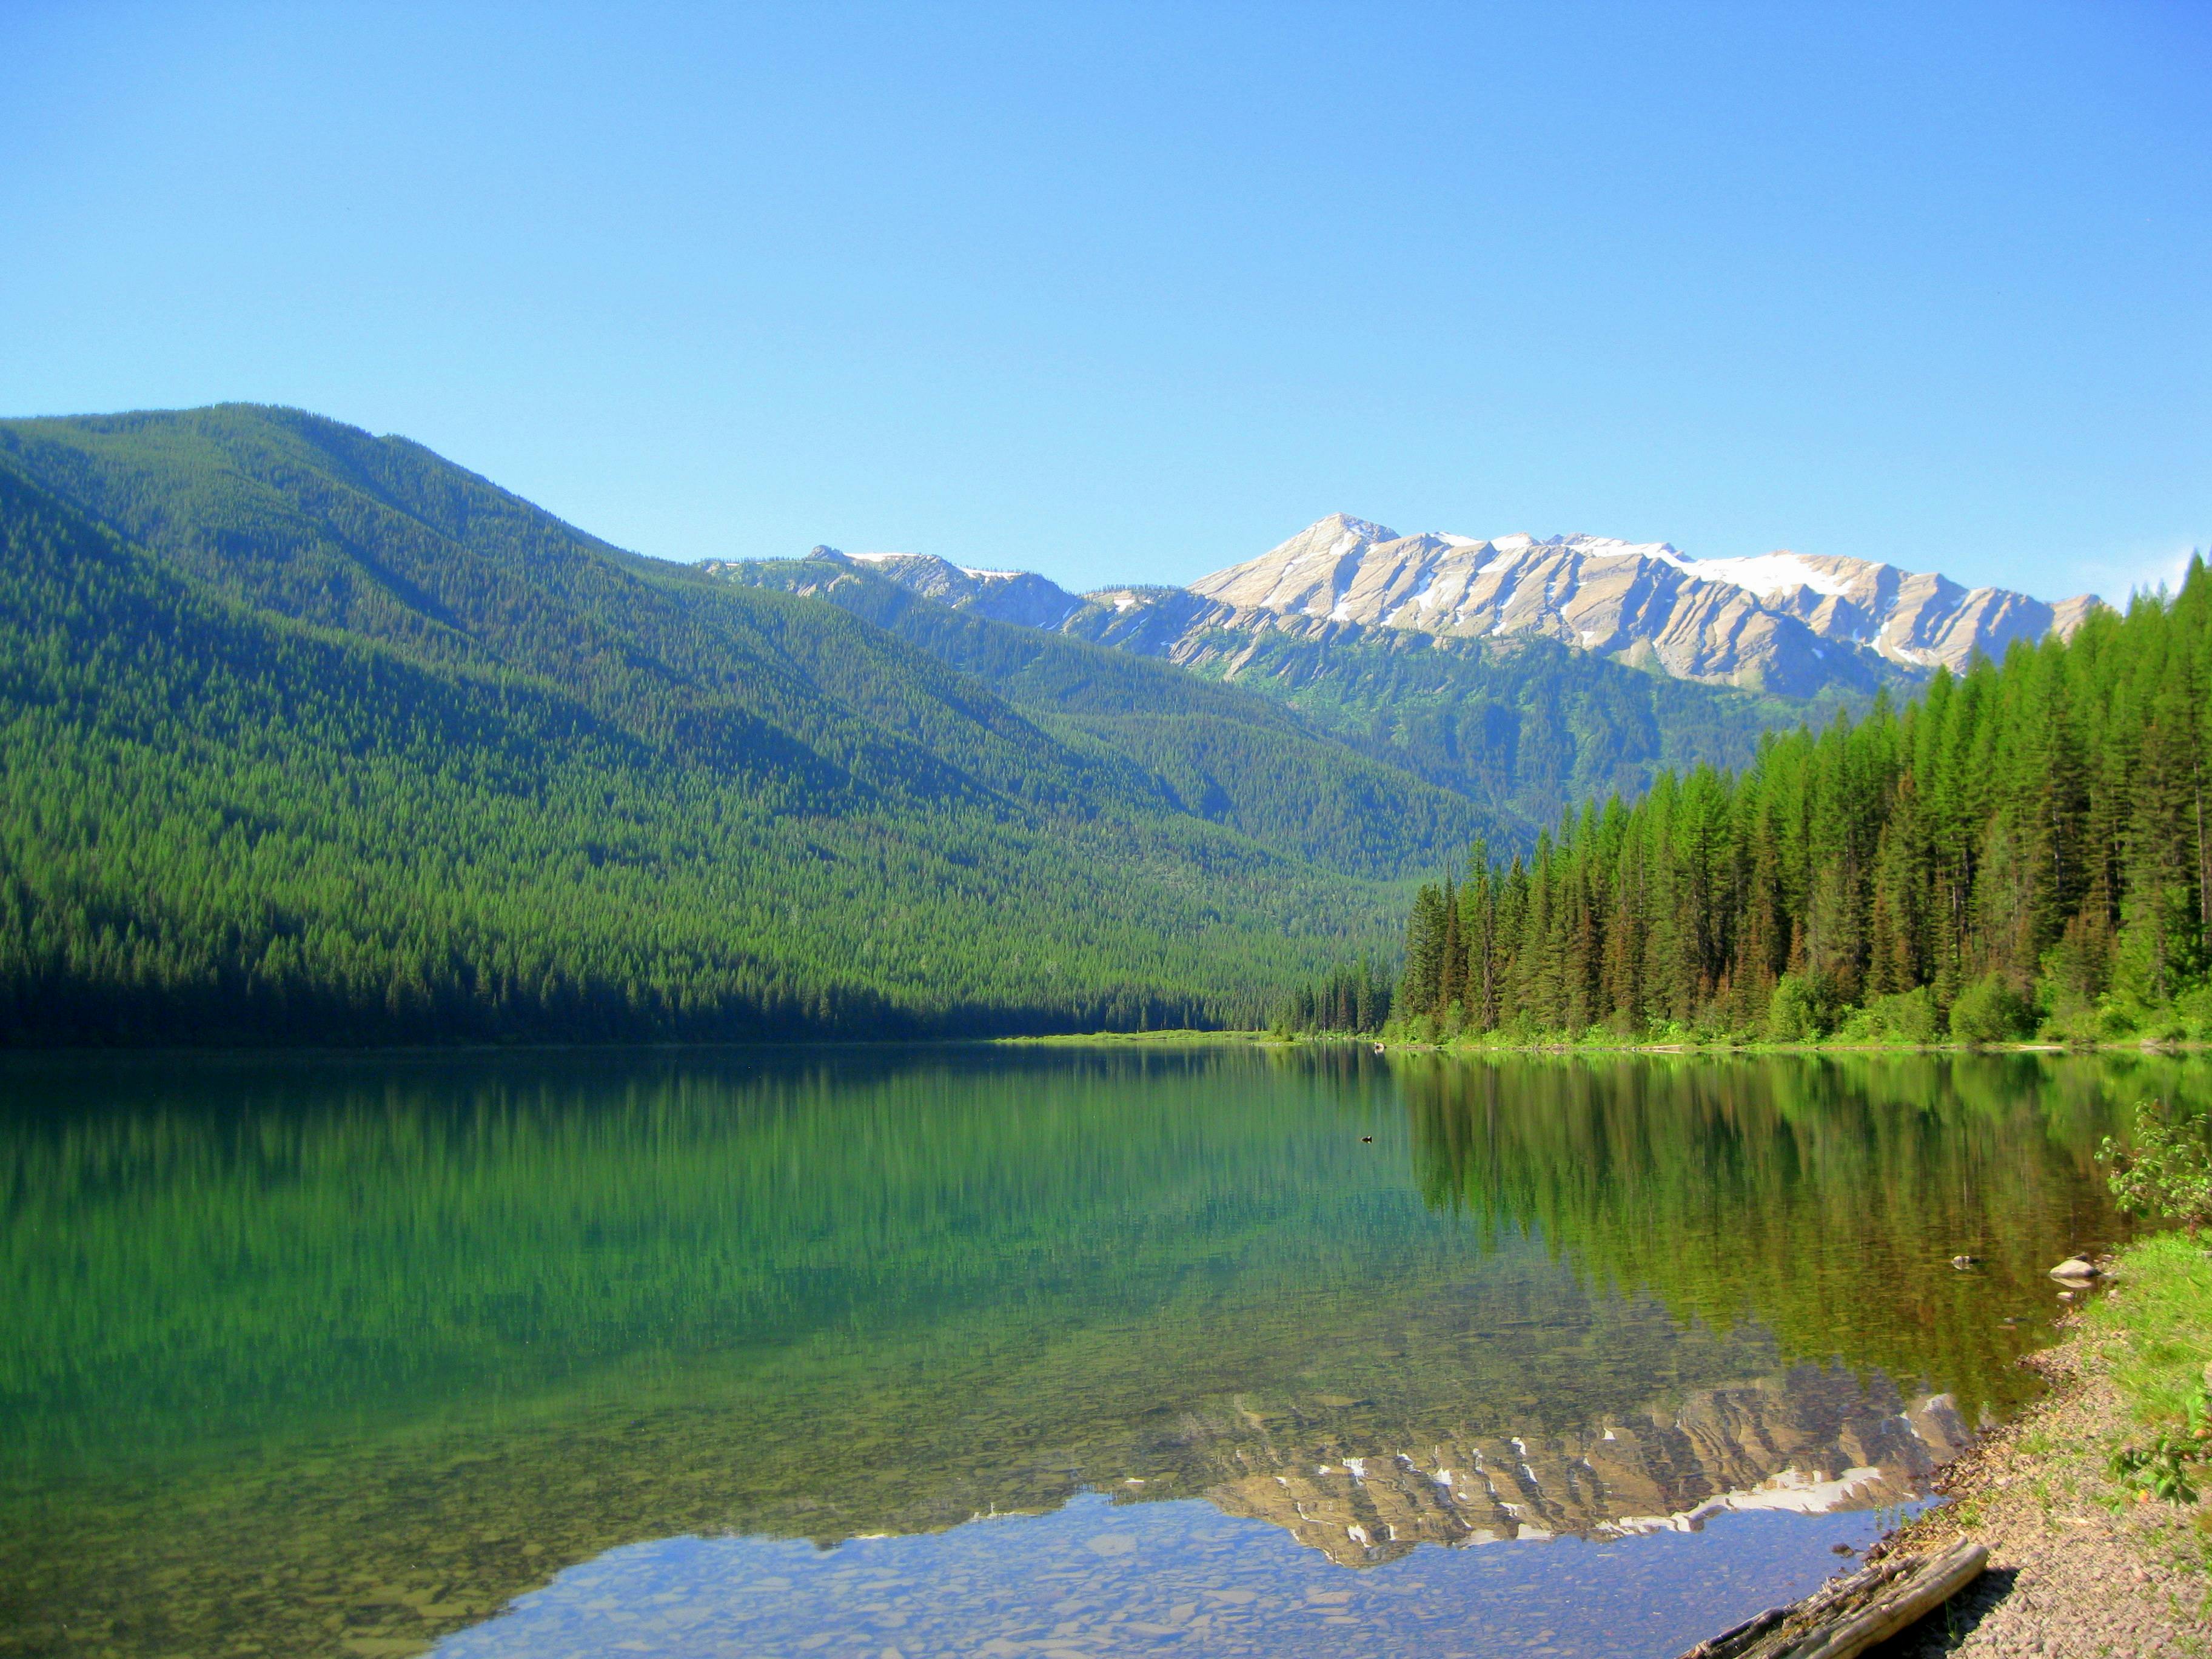 A lake and mountain landscape in Flathead National Forest.